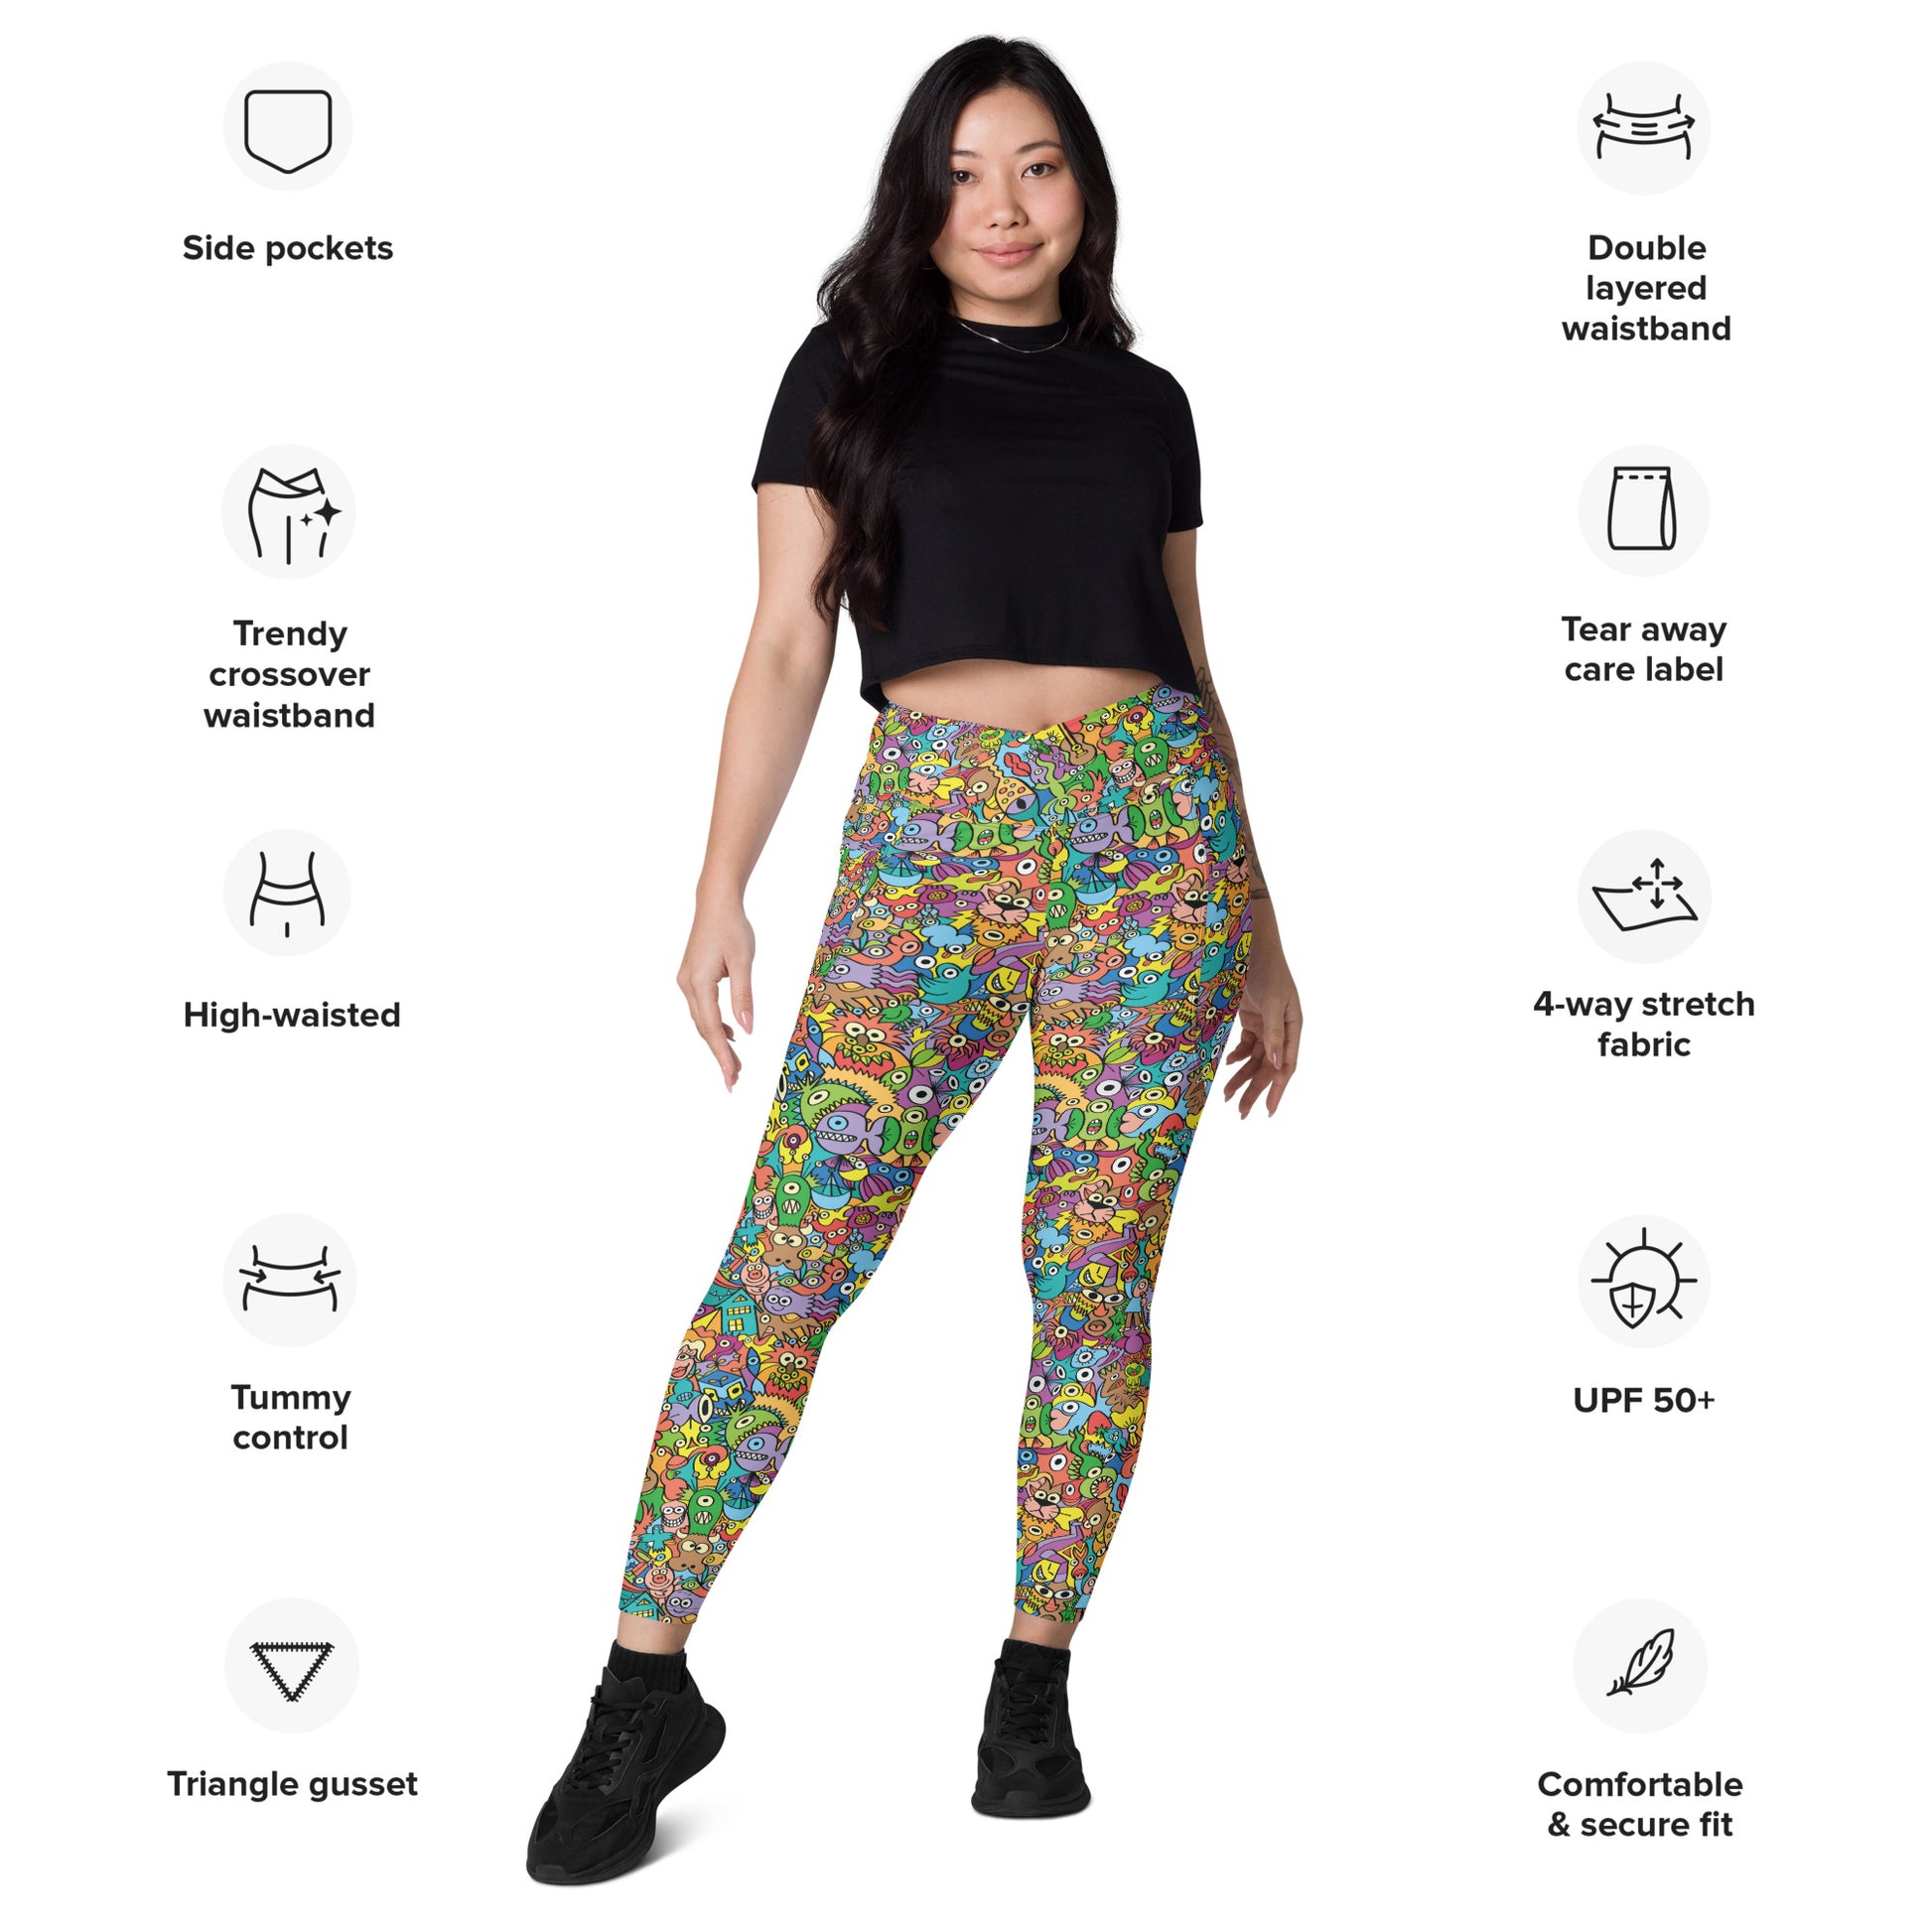 Cheerful crowd enjoying a lively carnival Crossover leggings with pockets. Product specifications